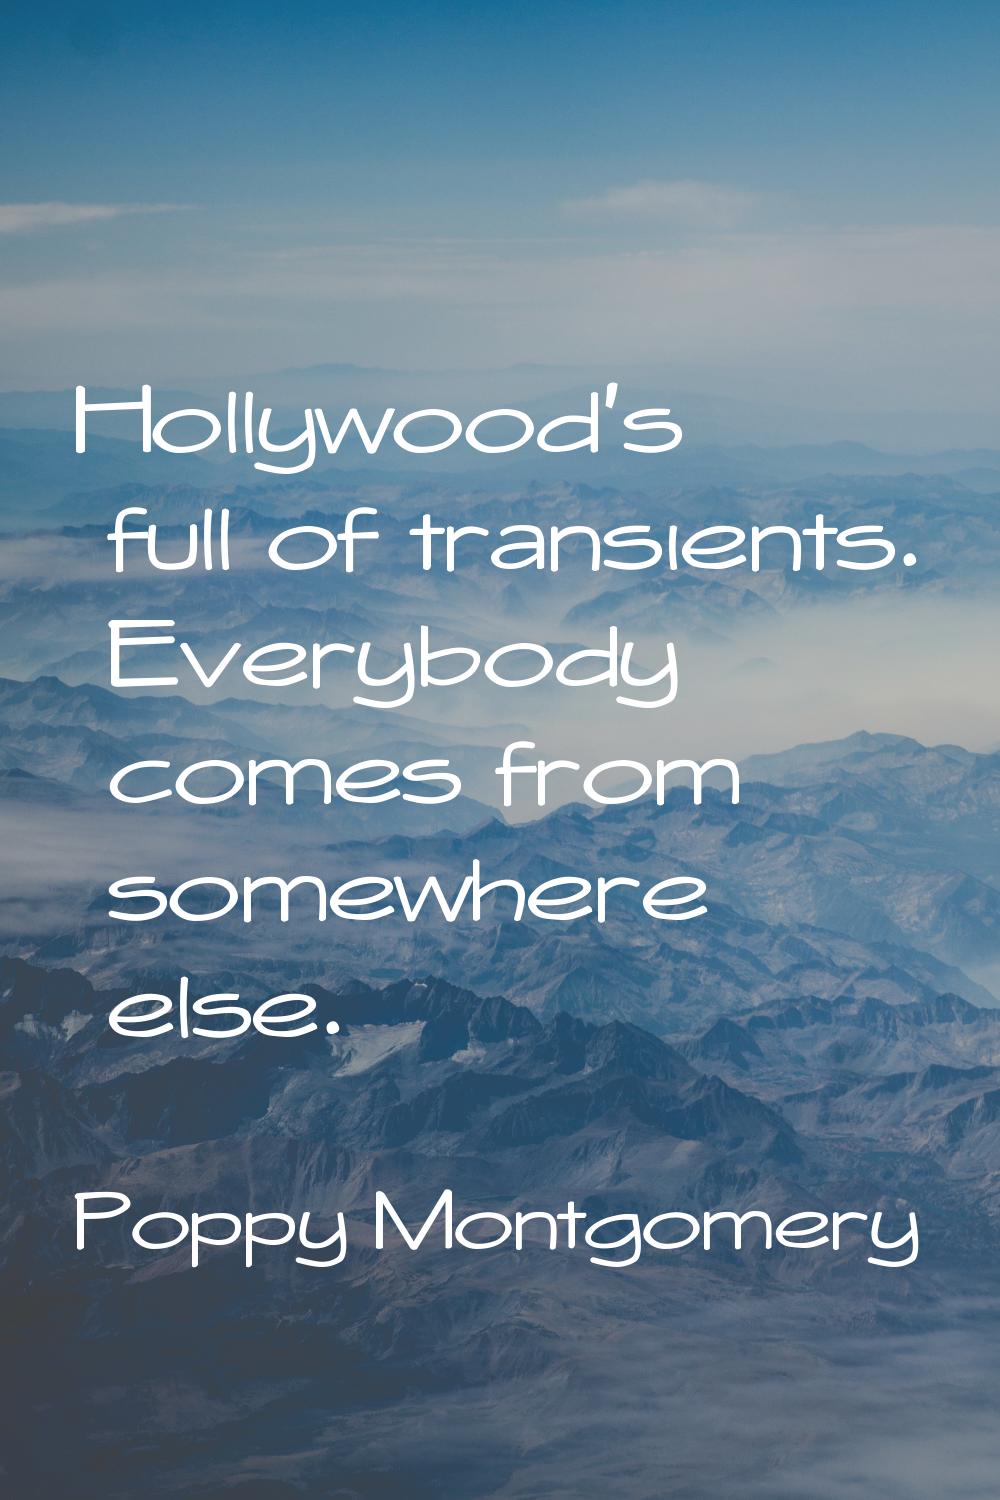 Hollywood's full of transients. Everybody comes from somewhere else.